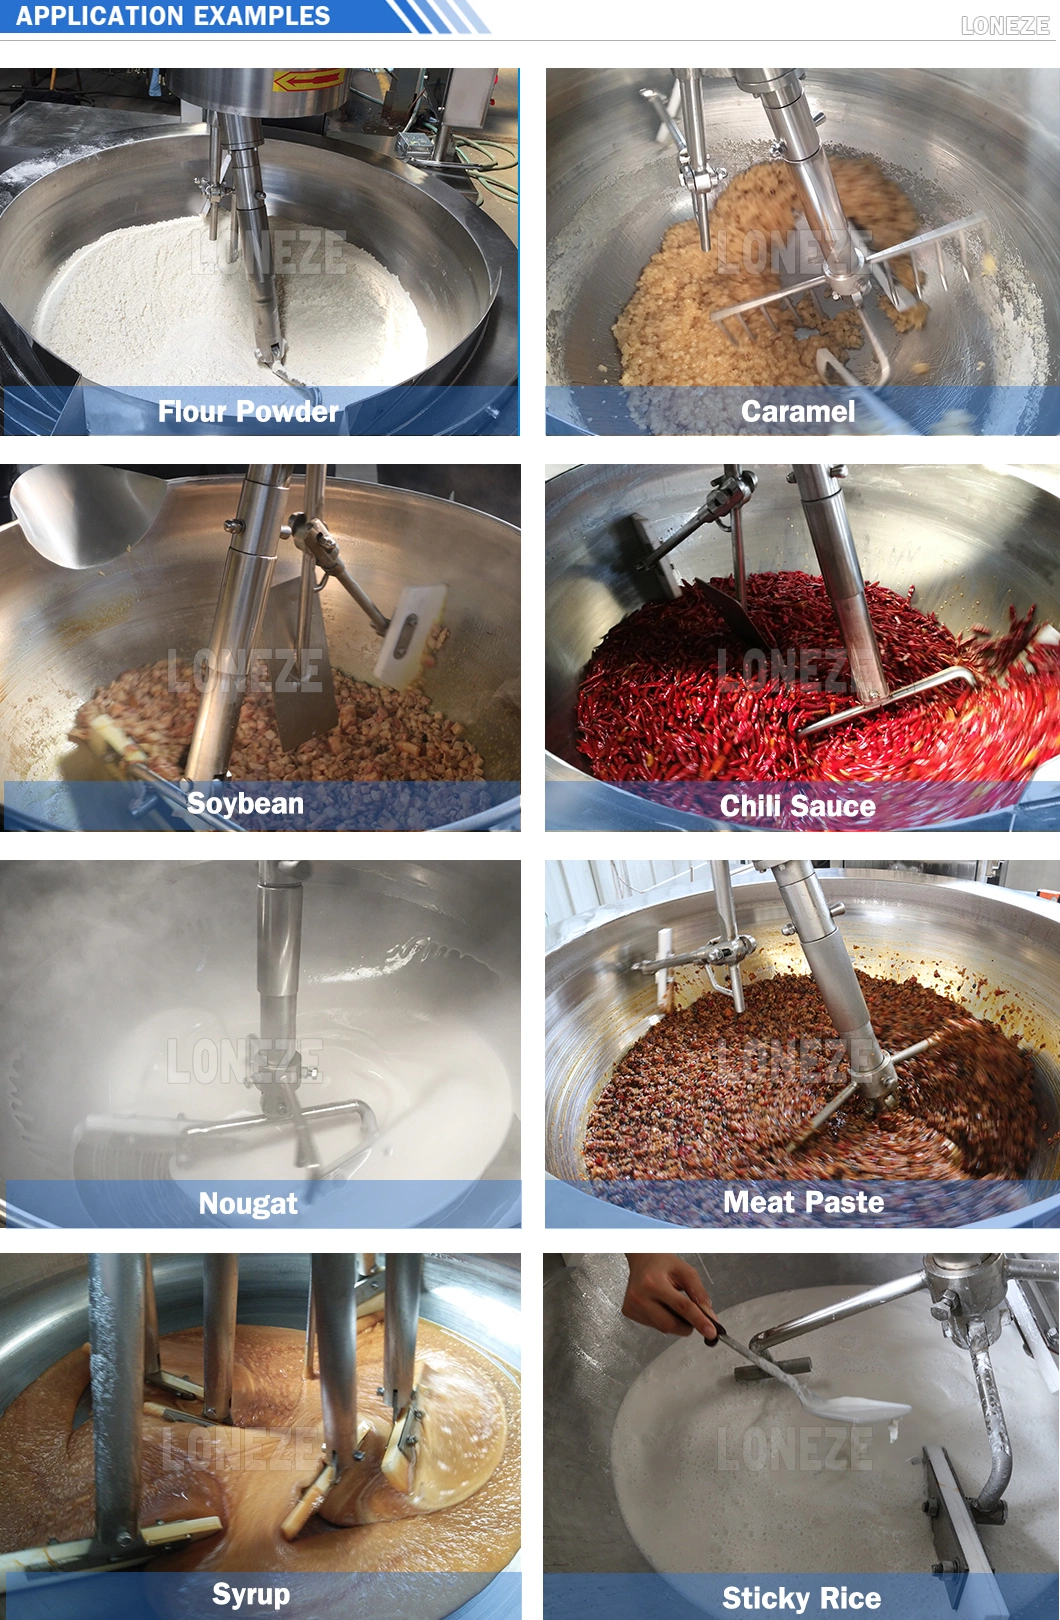 China Big Industrial Commercial Automatic Multi Planetary Tilting Curry Chili Bean Paste Mixing Making Electric Gas Steam Vinaigrettes Sauce Cook Wok